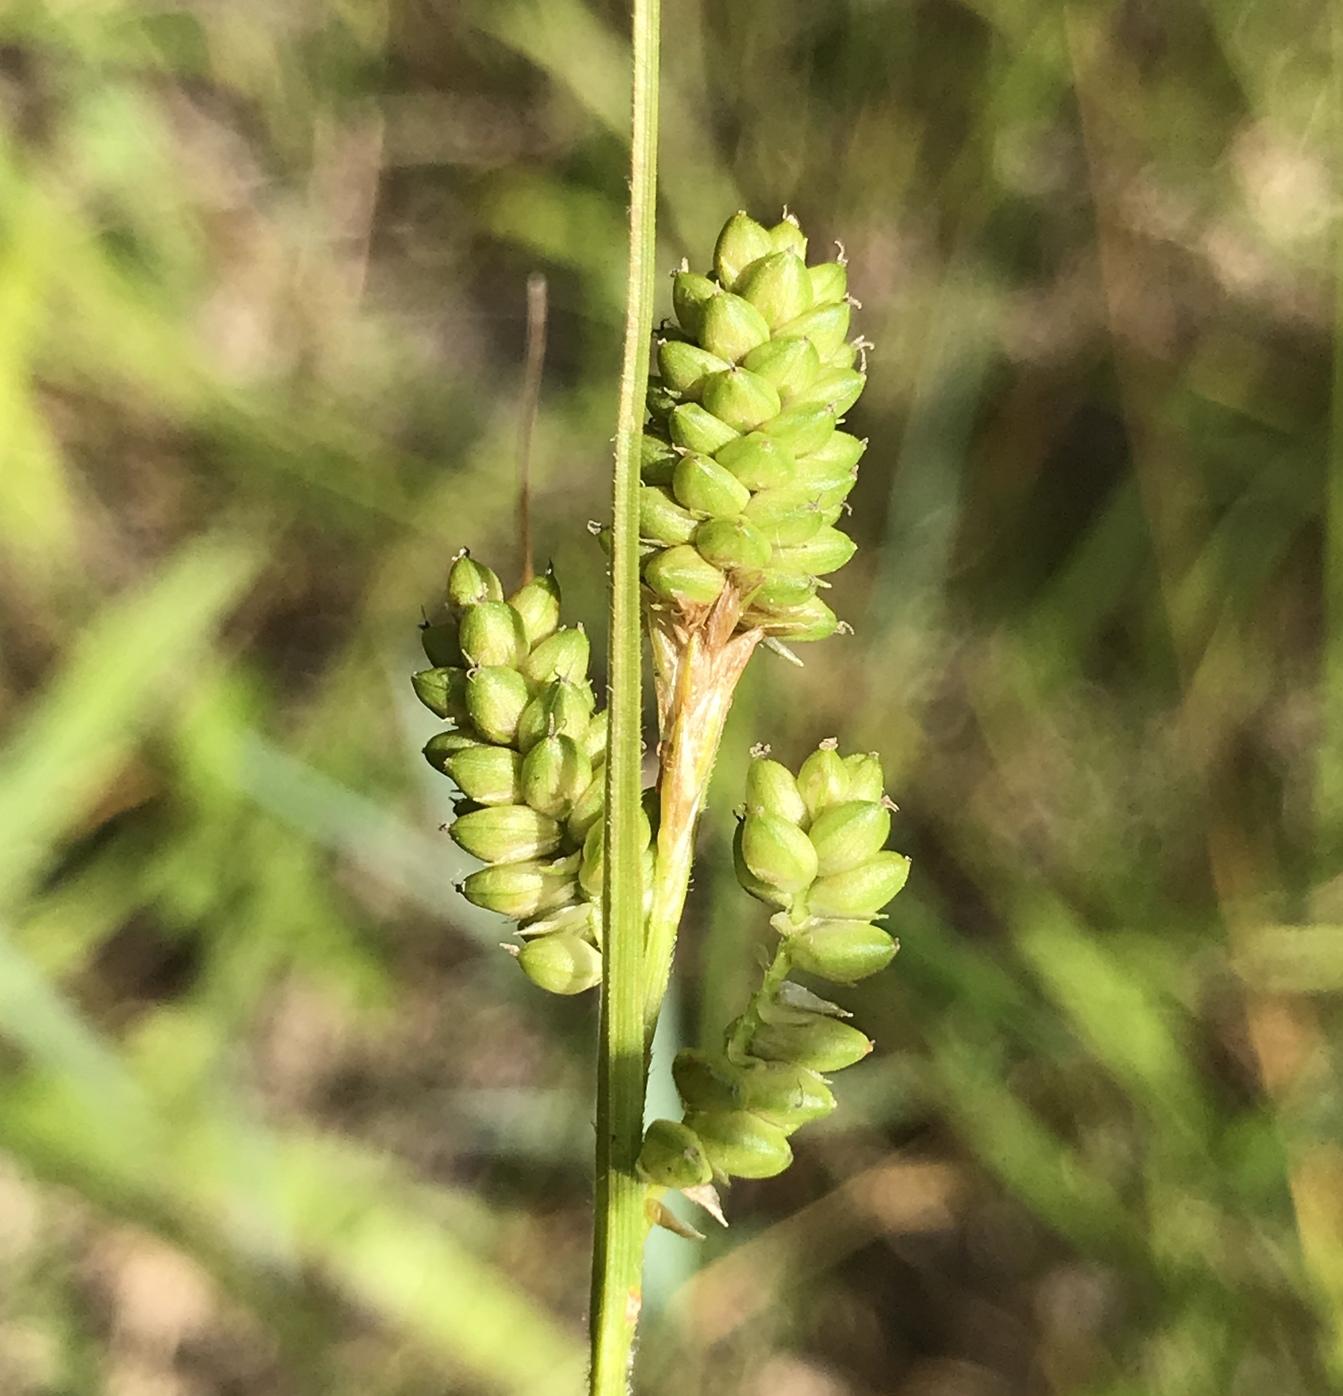 lime spikelets with brown-lime stems
